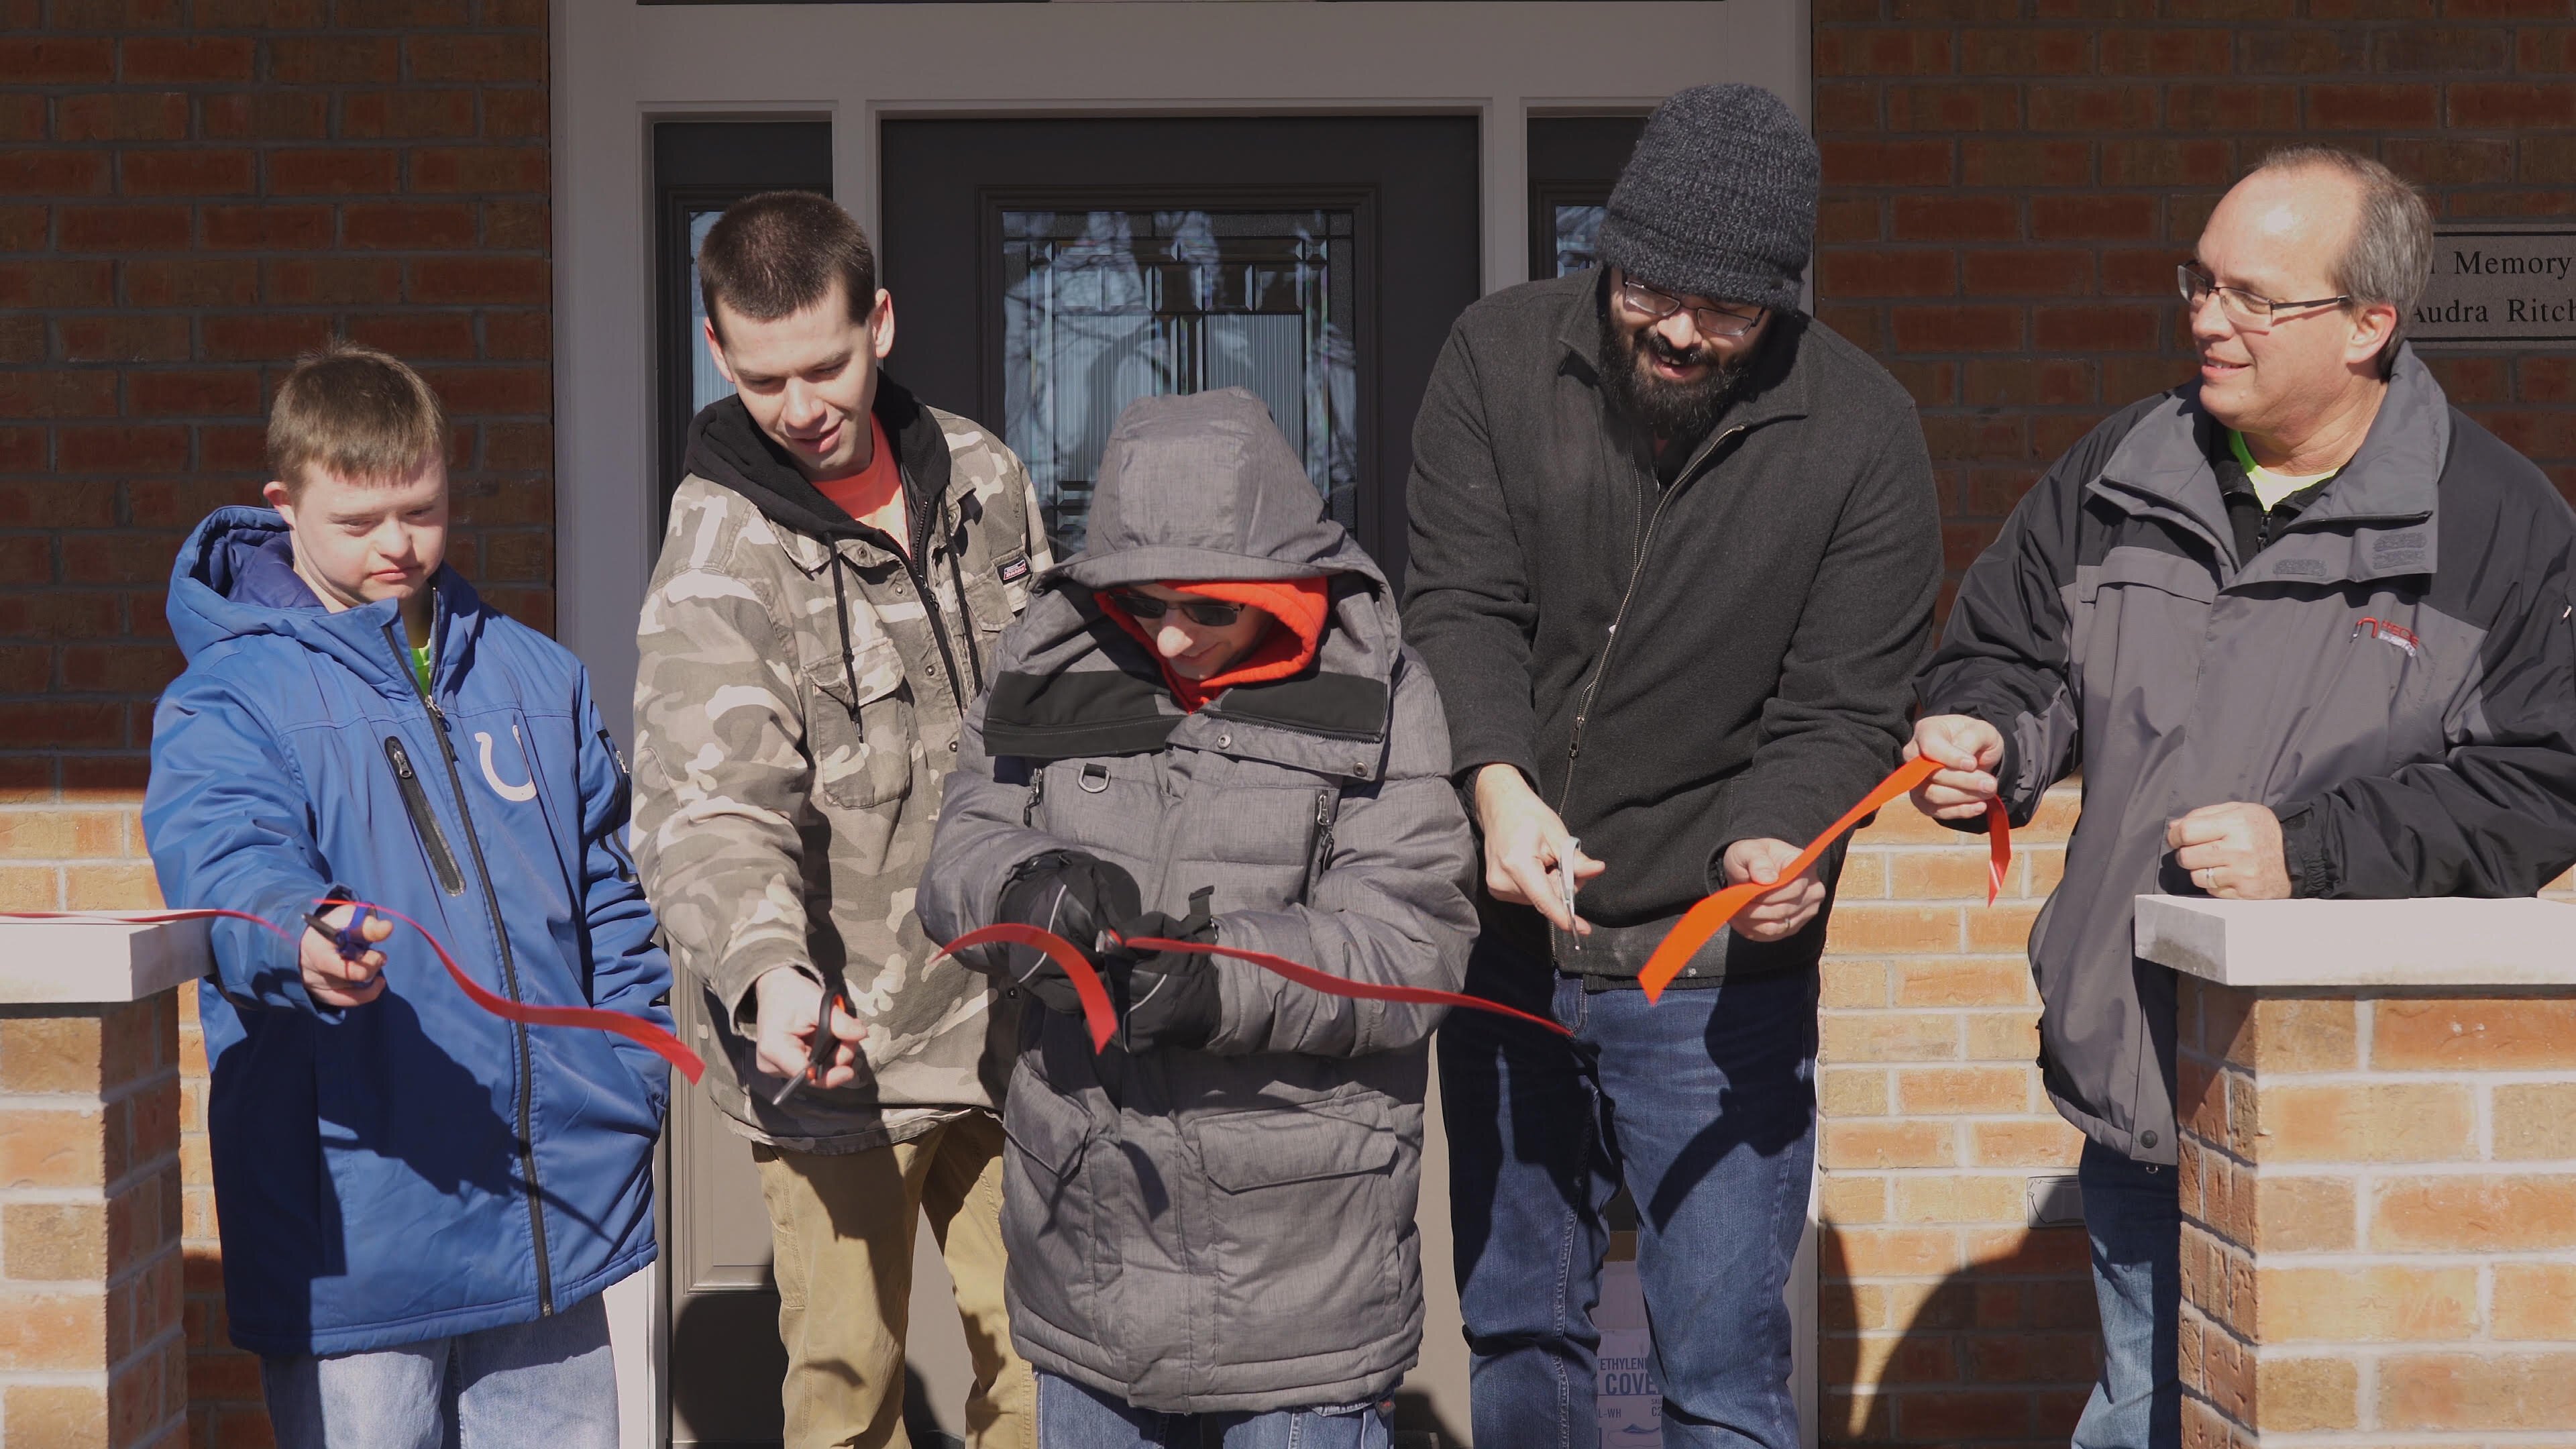 CASS Housing for people with developmental disabilities launched its first Independent Living home in January 2019. Its second home is finishing up in May 2020.